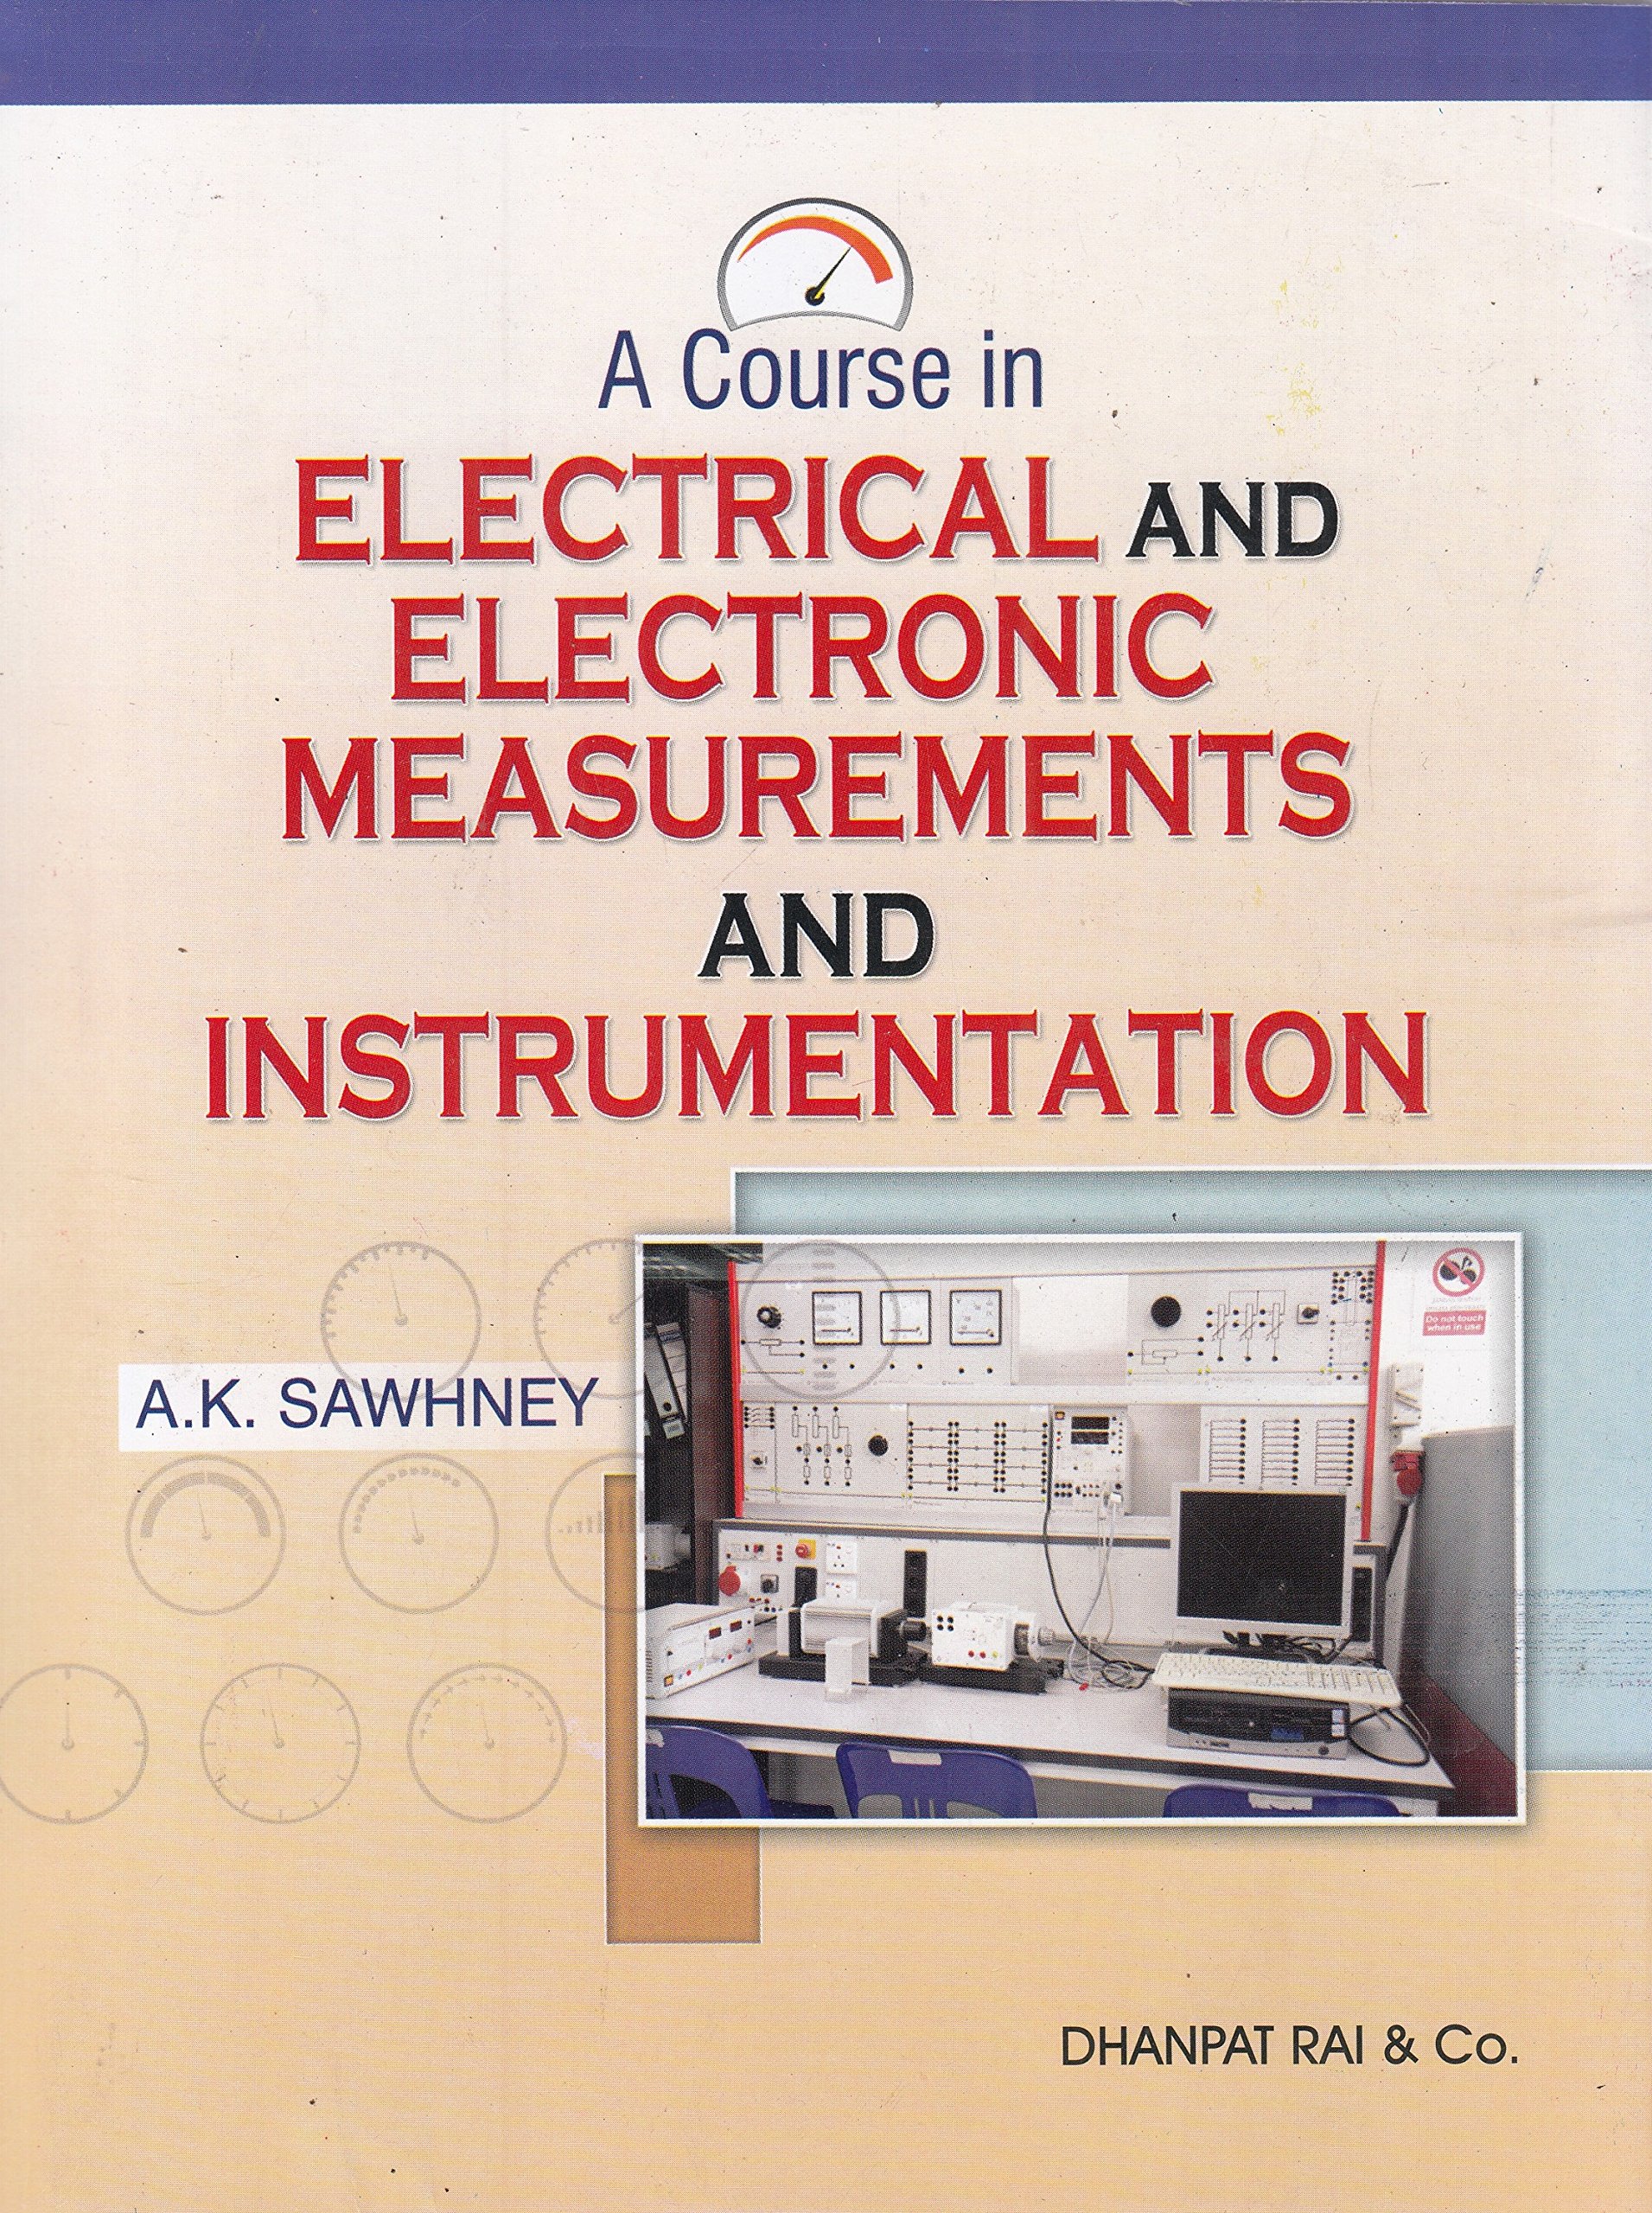 Modern Electronic Instrumentation And Measurement Techniques Ebook Free Download